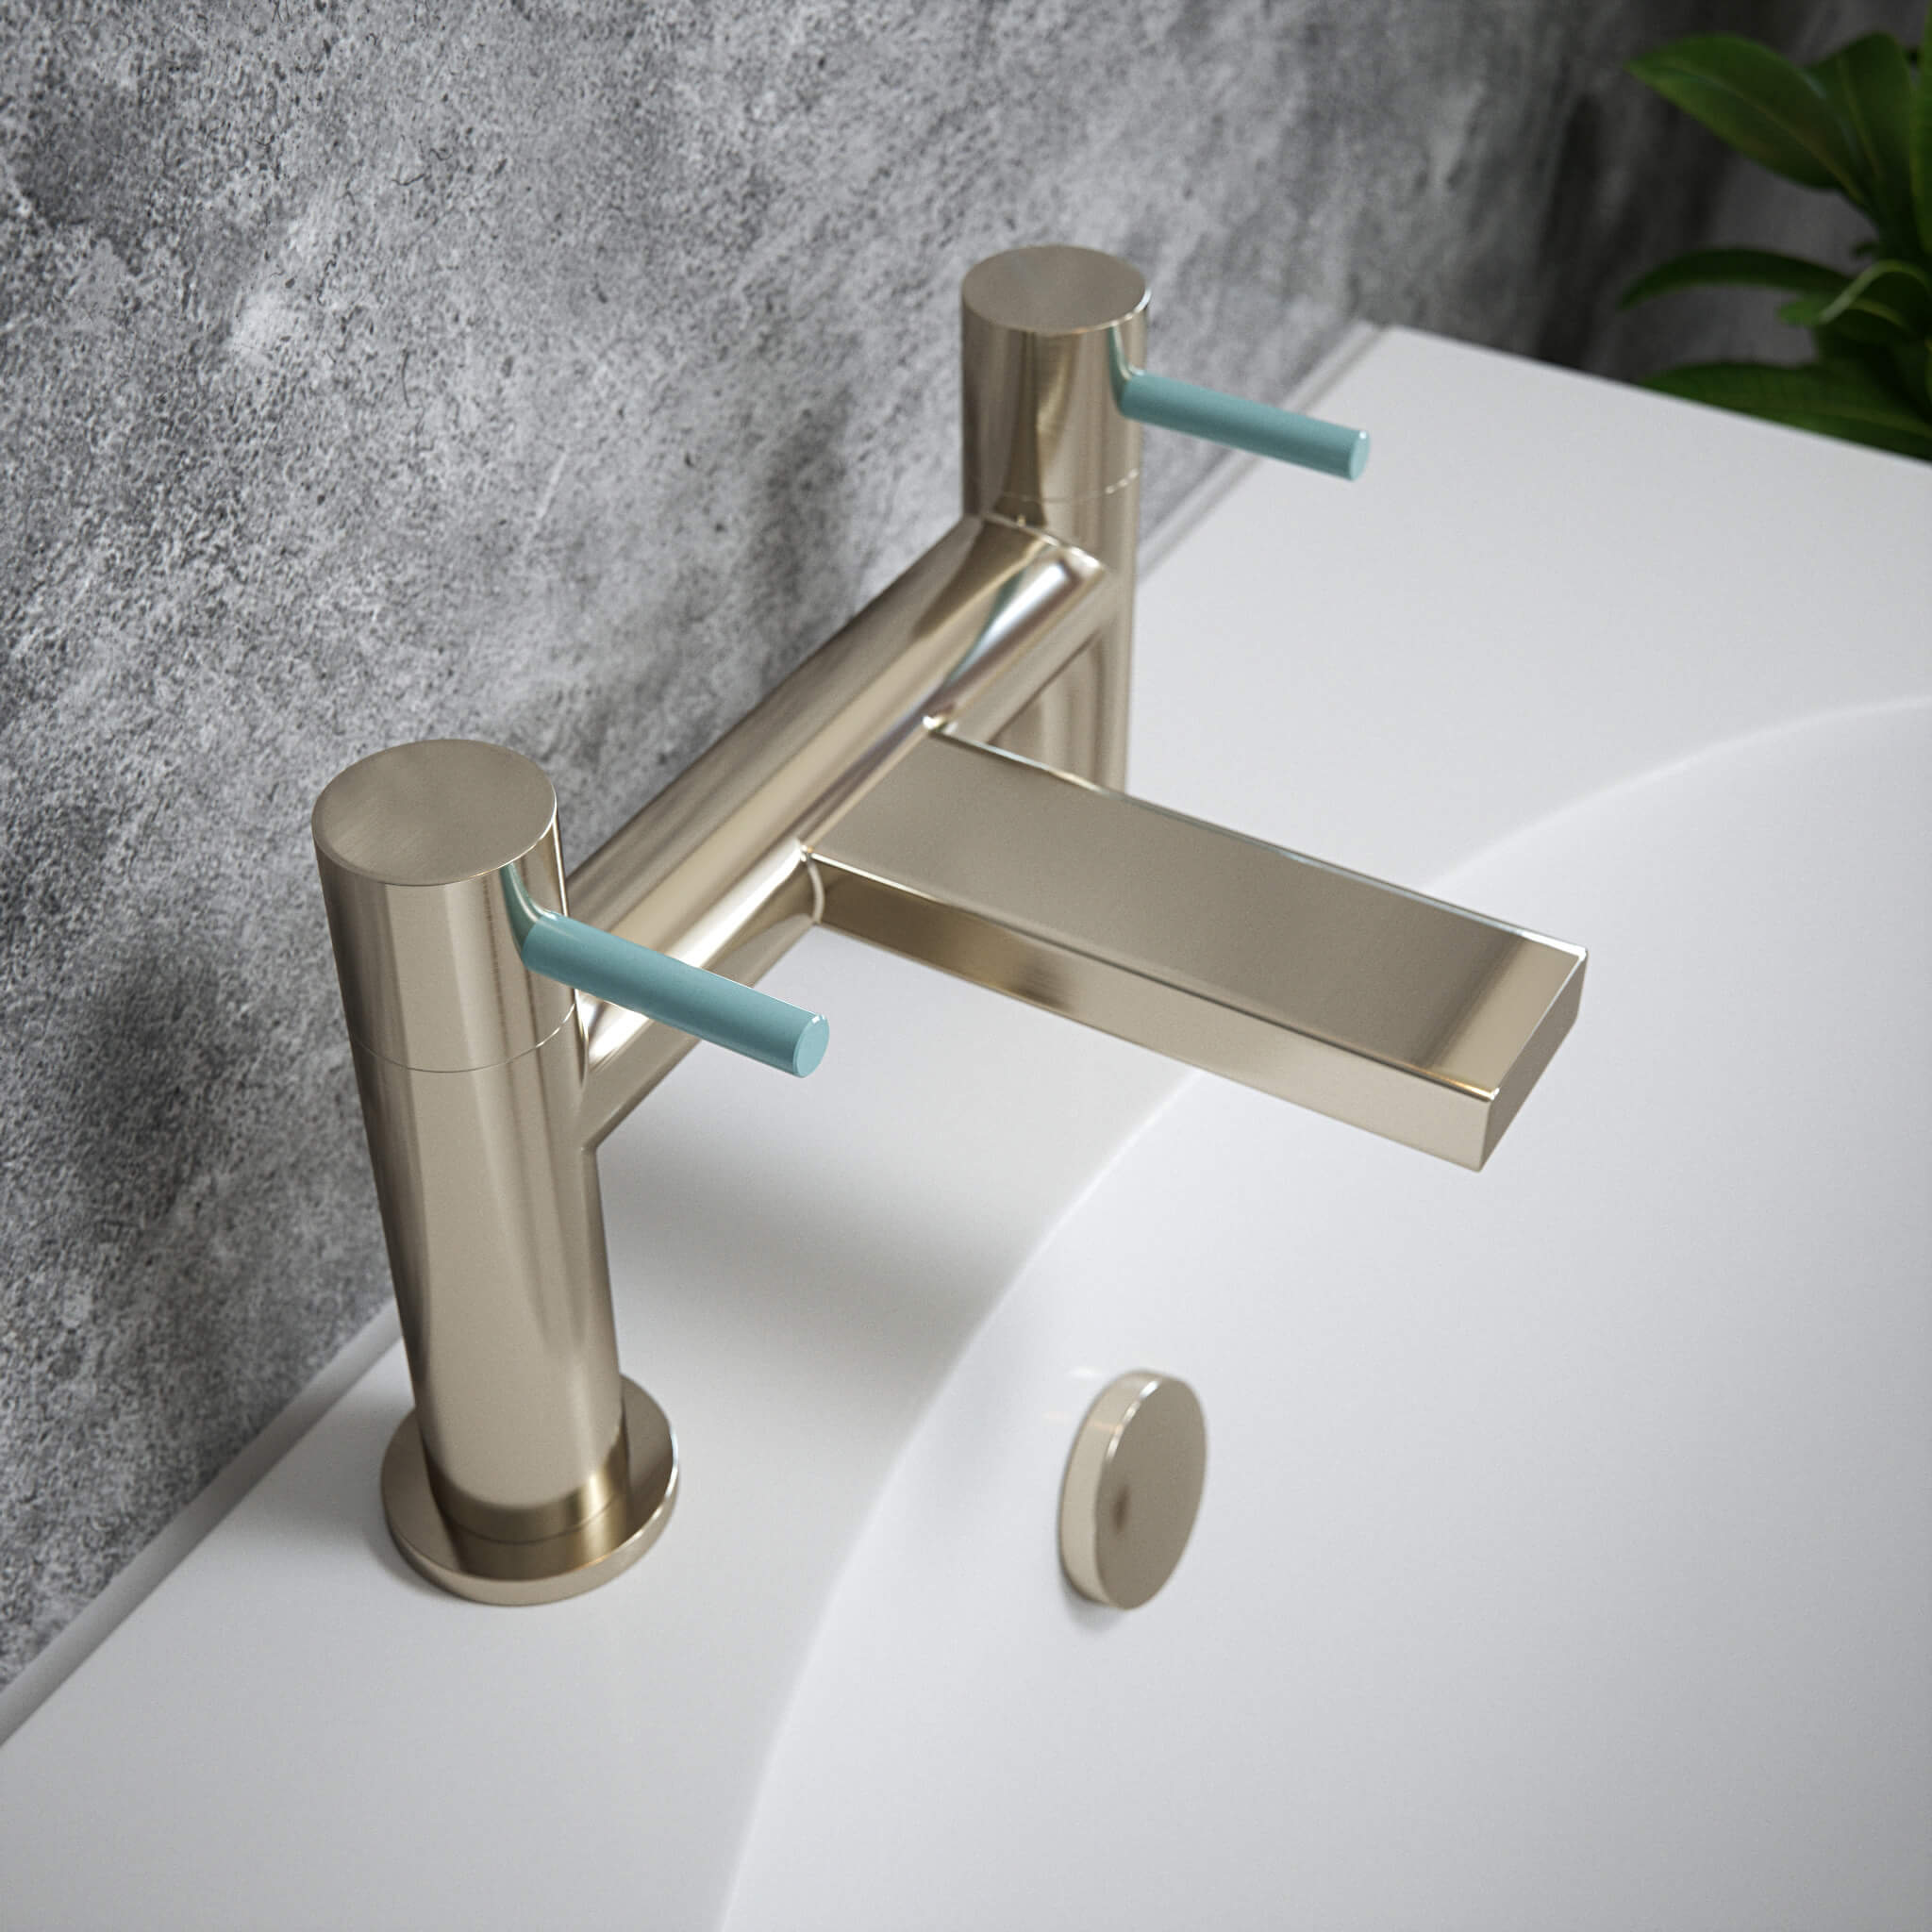 https://img.tapwarehouse.com/products/tap-factory-brushed-nickel-bath-filler-blue-handles-lifestyle.jpg